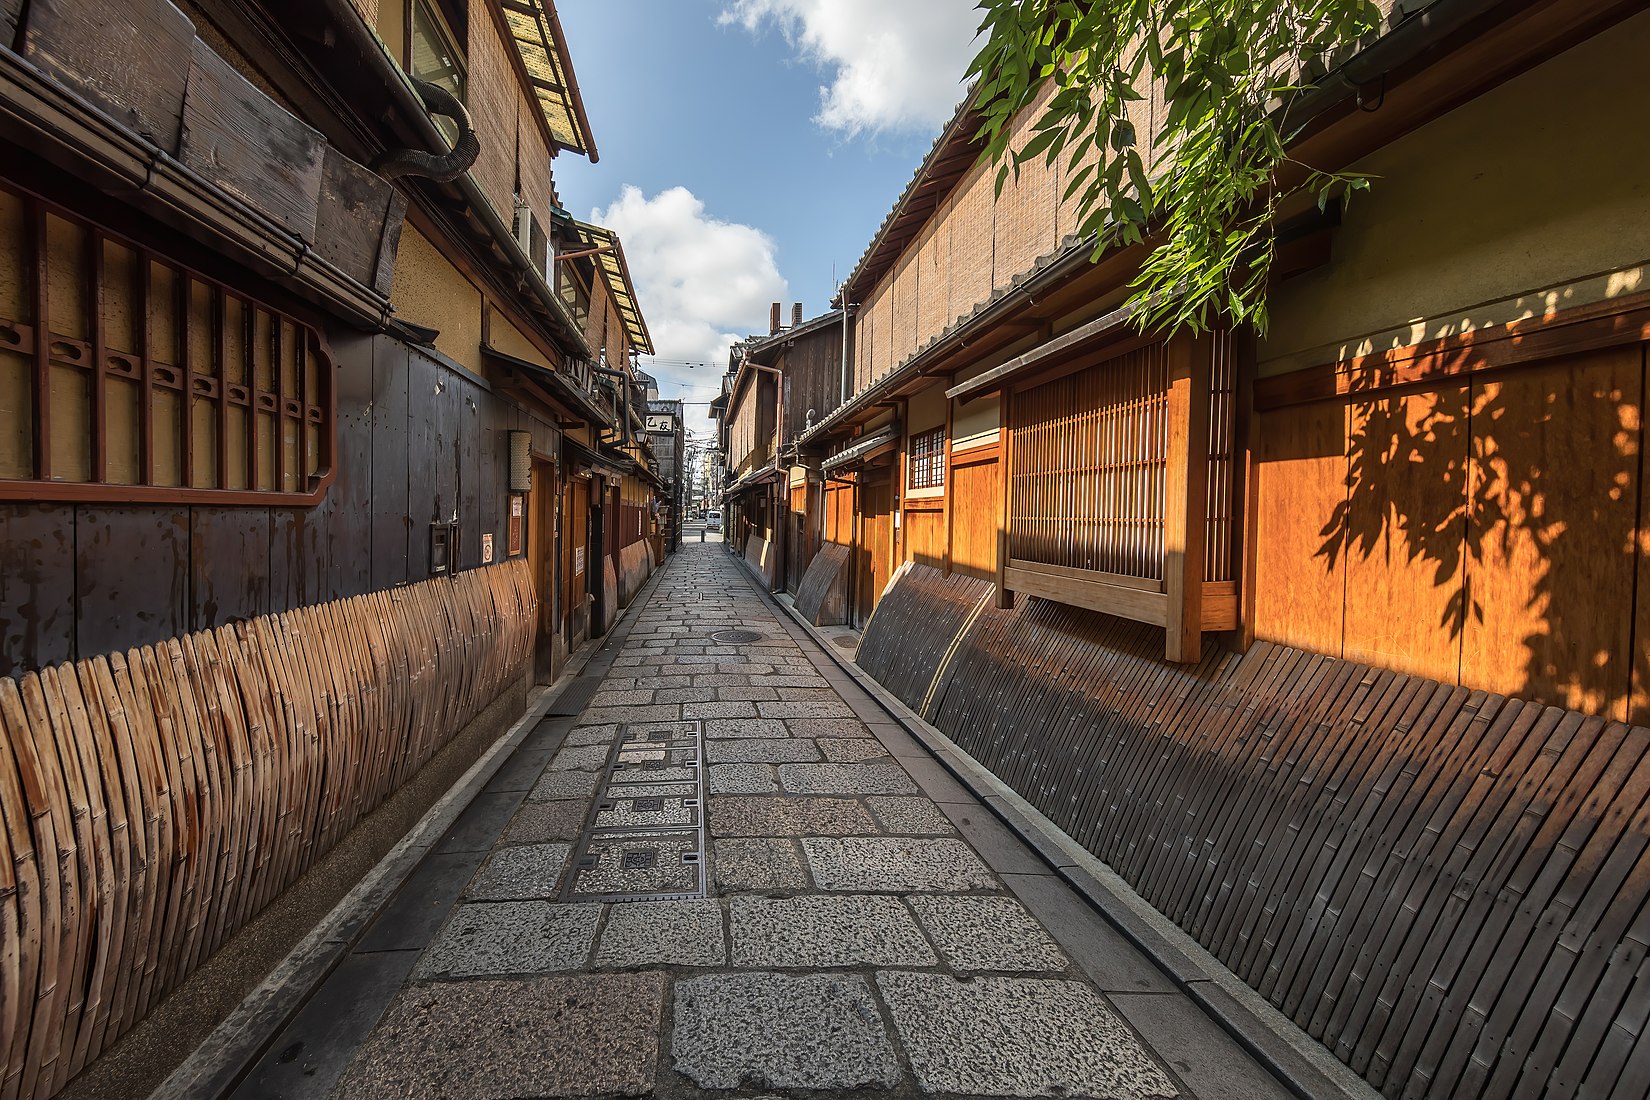 Wooden and bamboo facades of dwellings with sudare in a cobbled street of Gion, perspective effect with vanishing point, Kyoto, Japan.jpg